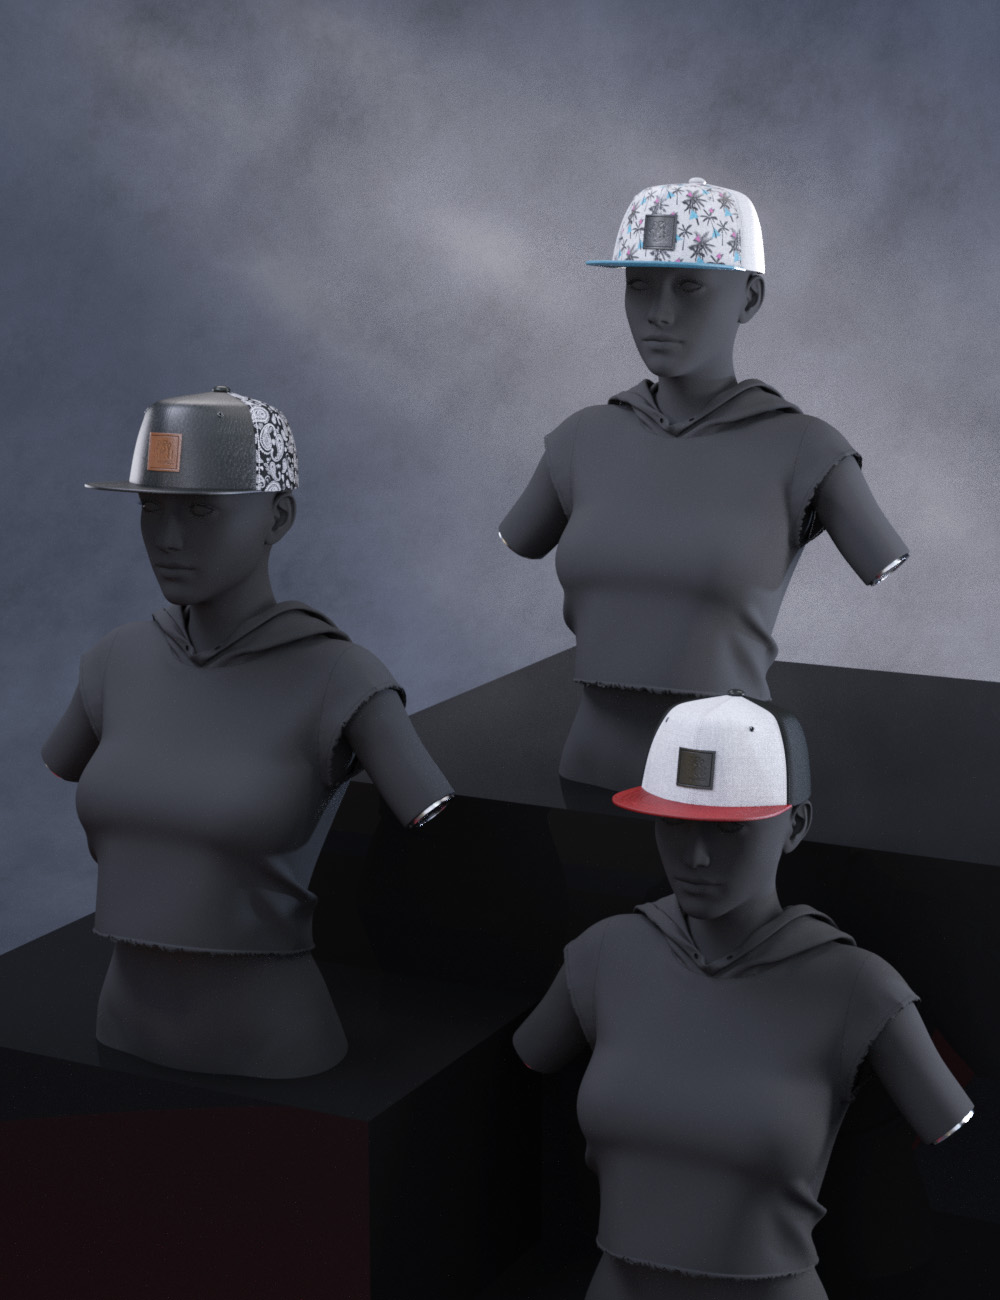 AJC Pro Skate Cap for Genesis 8 and 8.1 Females